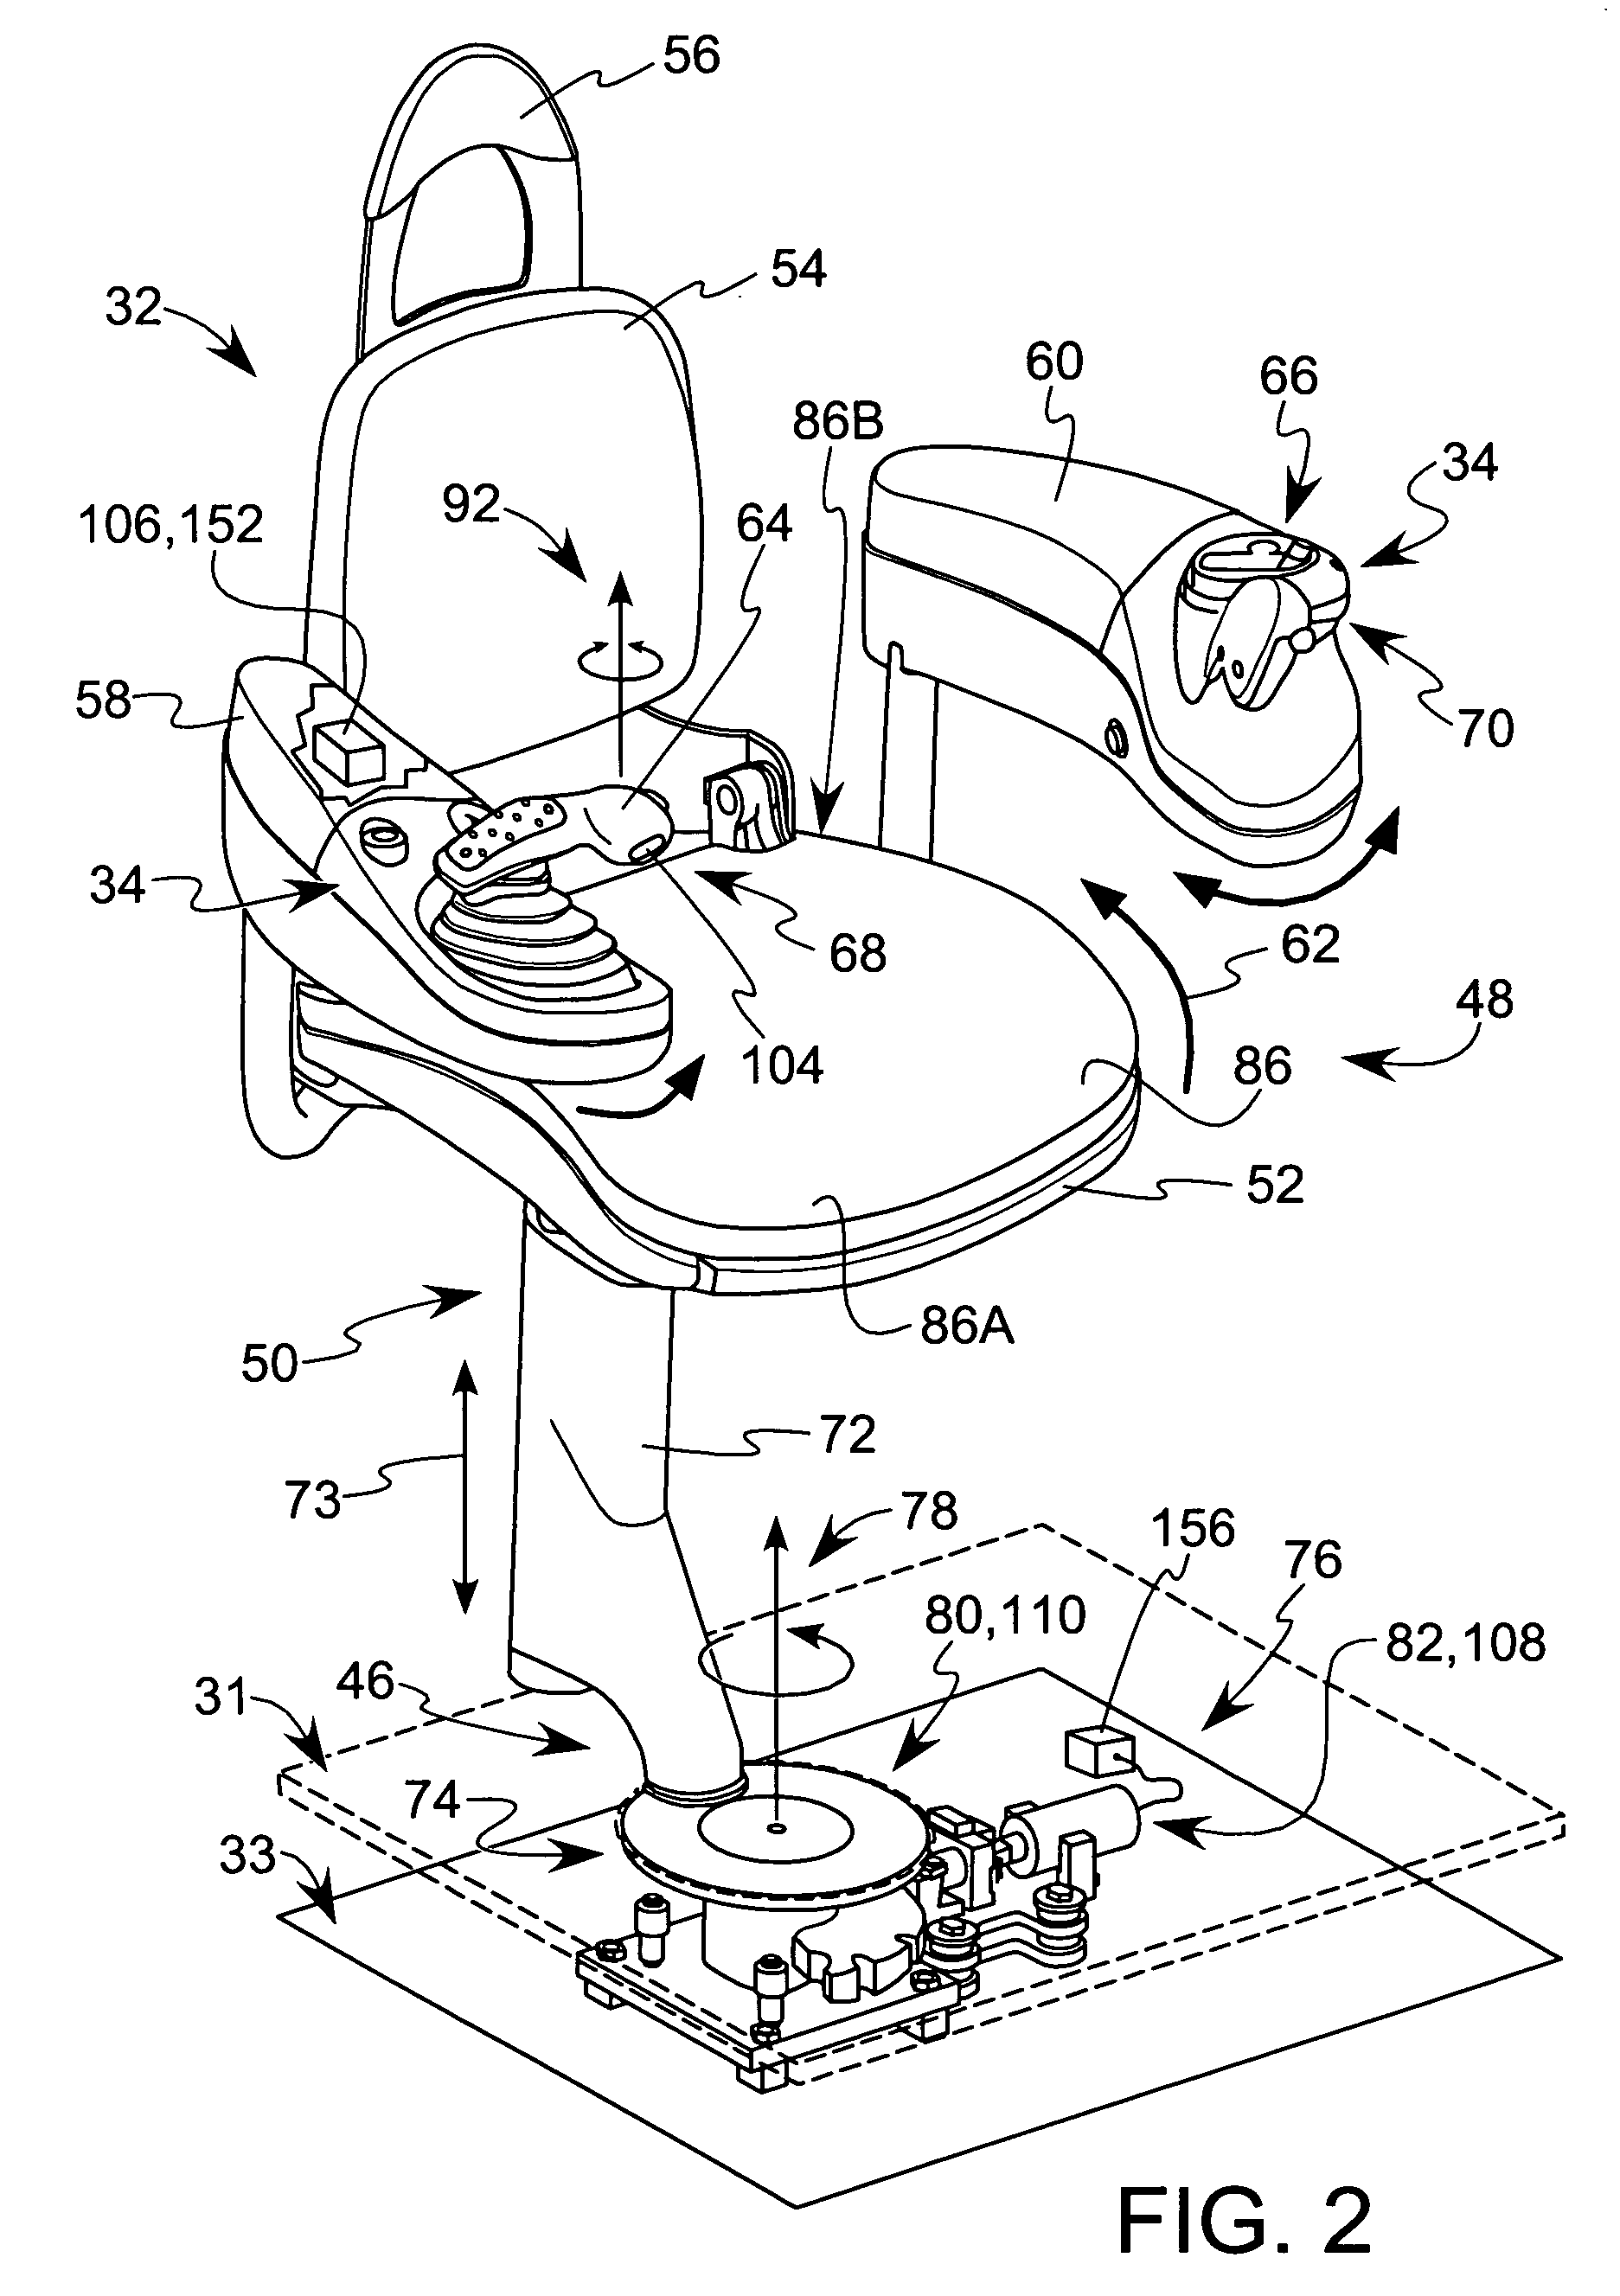 Rotating and/or swiveling seat